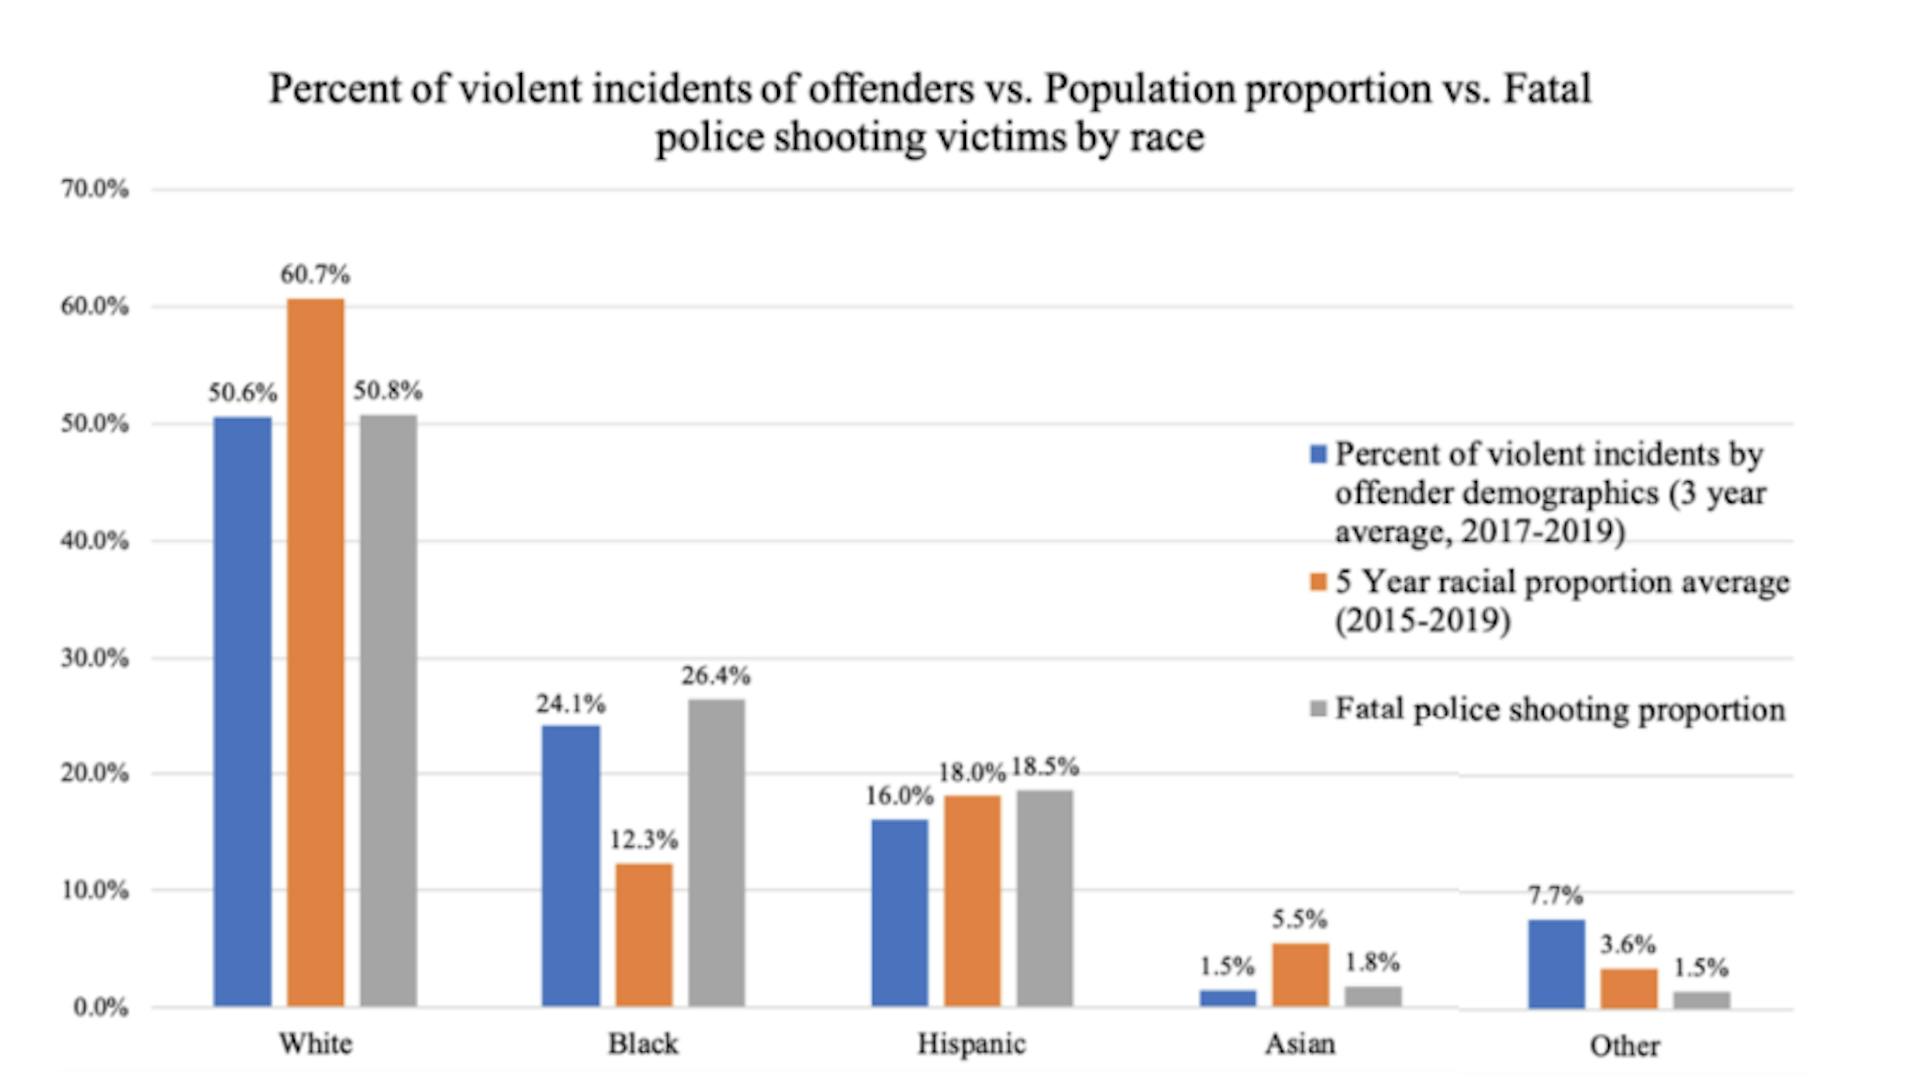 Figure 3. Percent of violent incidents of offenders (3-year average) VS. 5-year average population proportion VS. Fatal police shooting victims by race